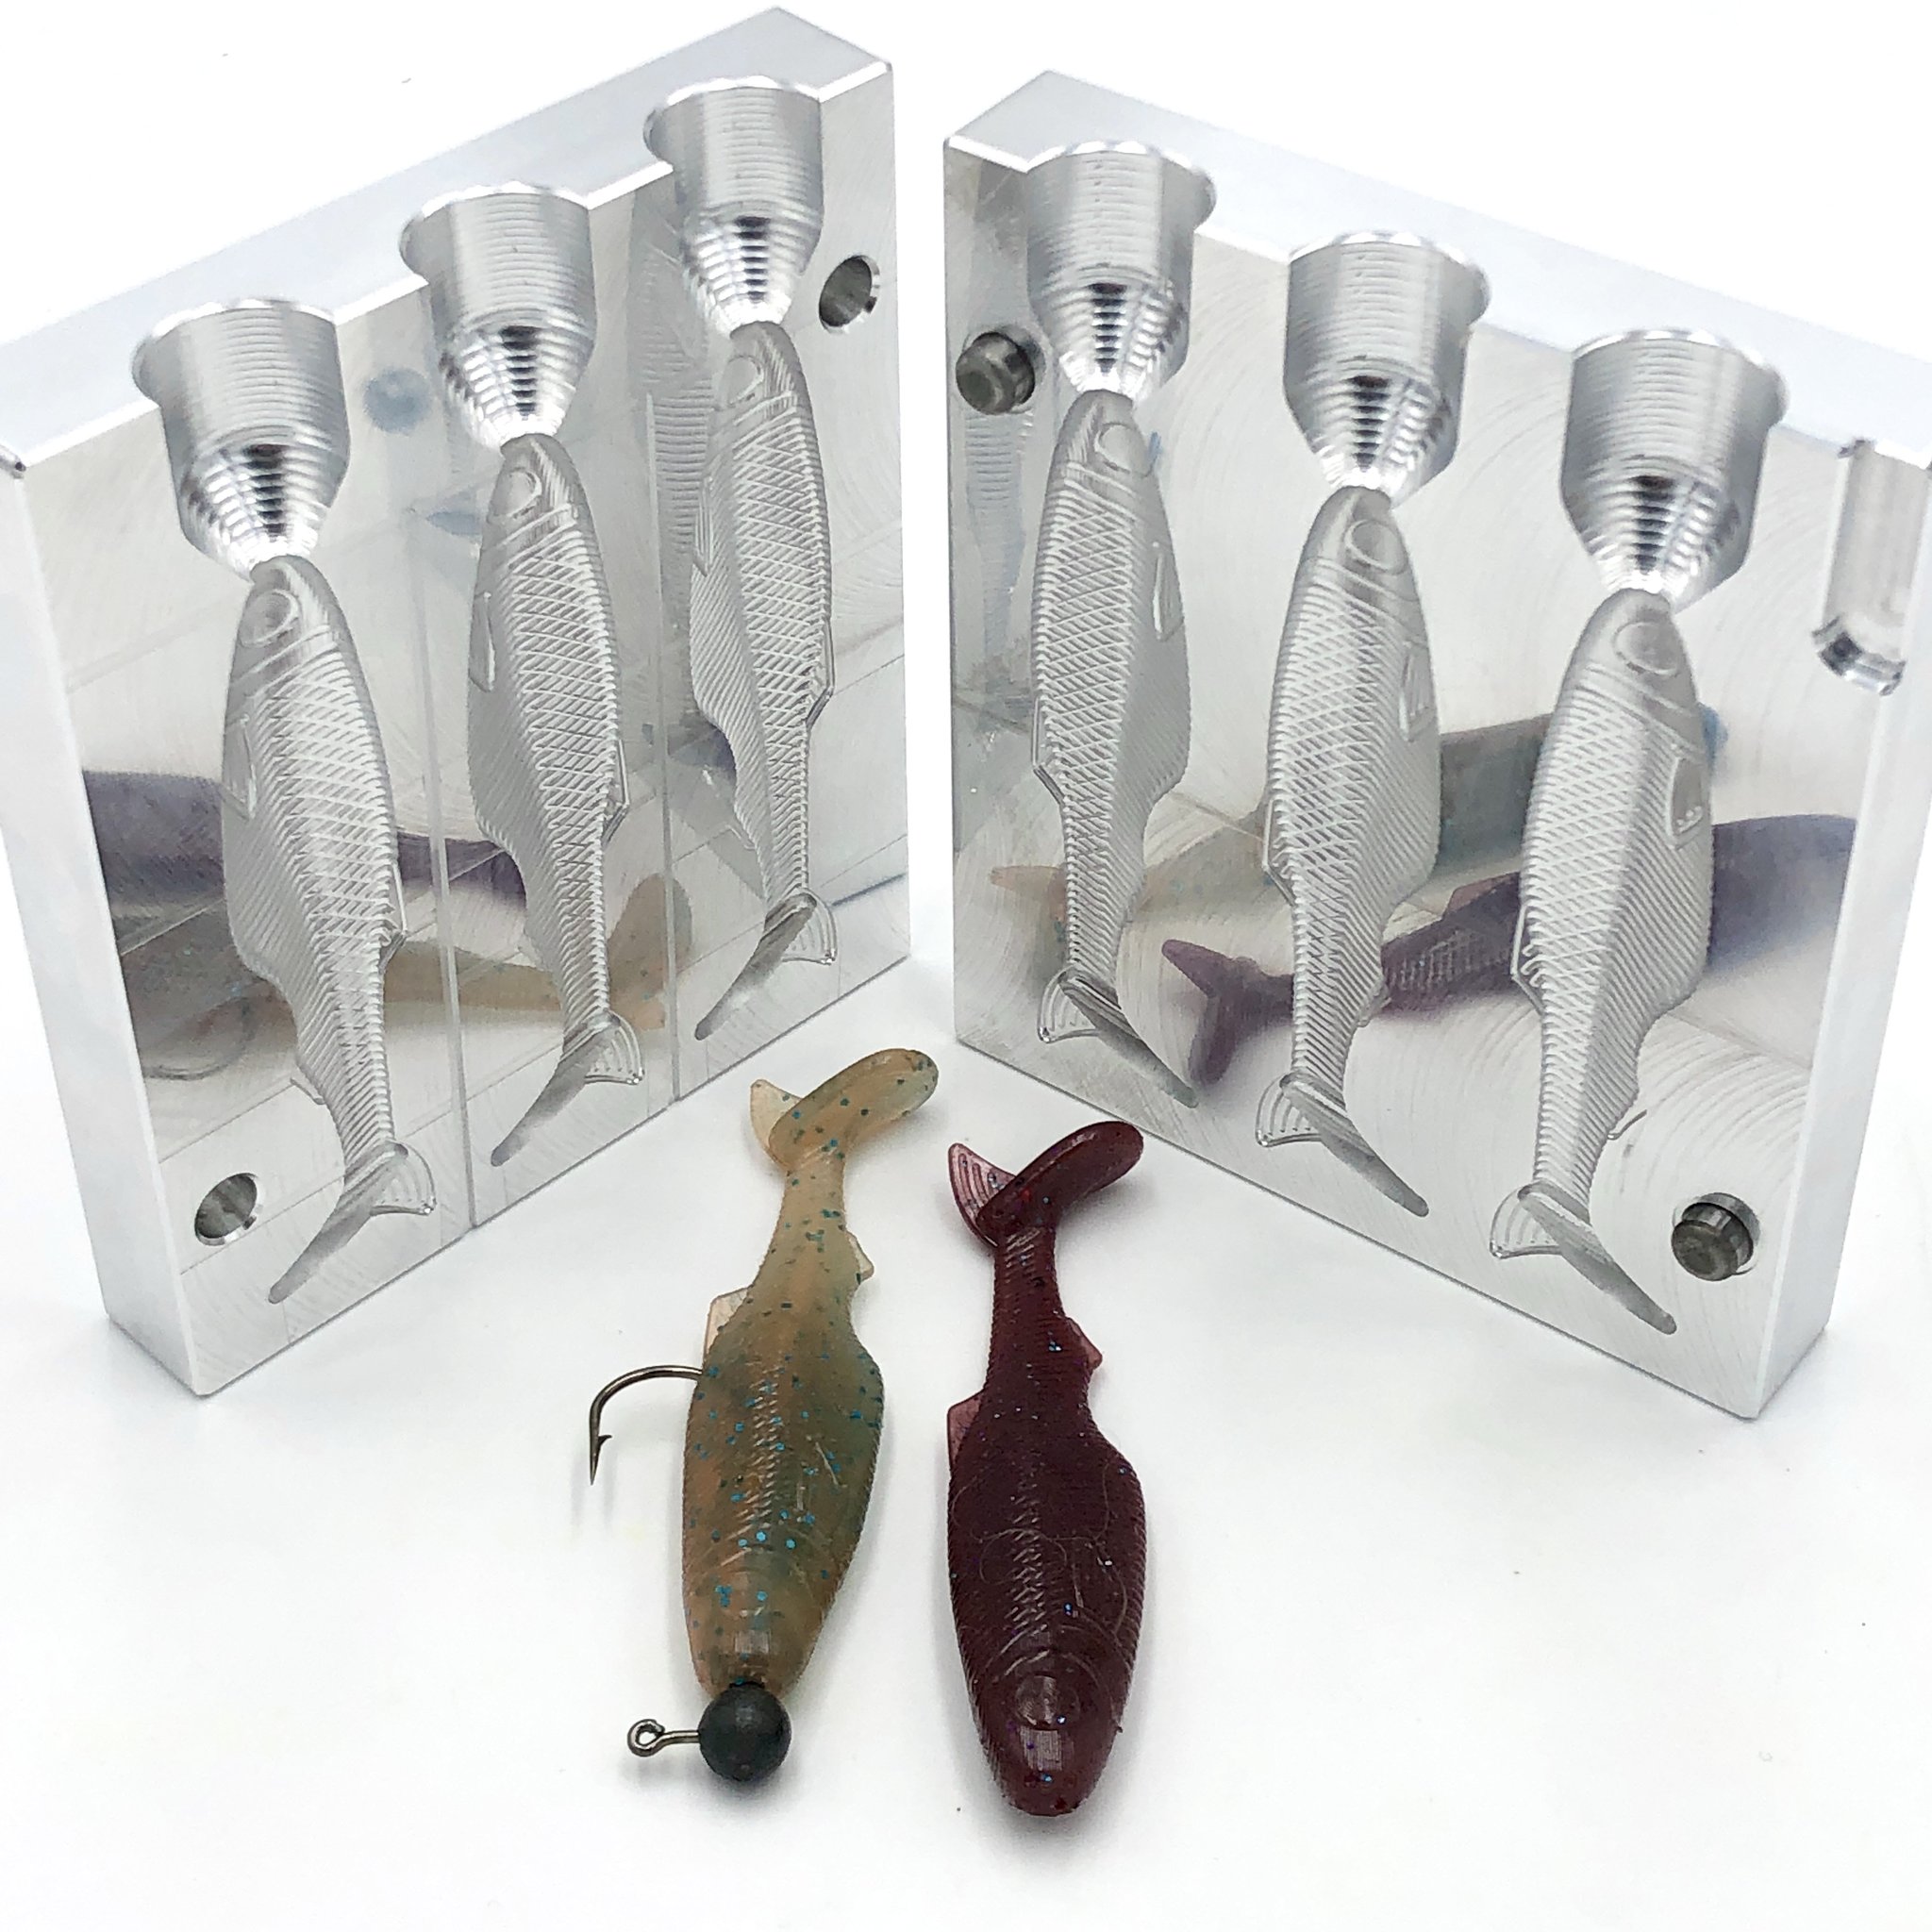 Inch Inshore Paddle Tail Swimbait Hand Injection Mold, 46% OFF